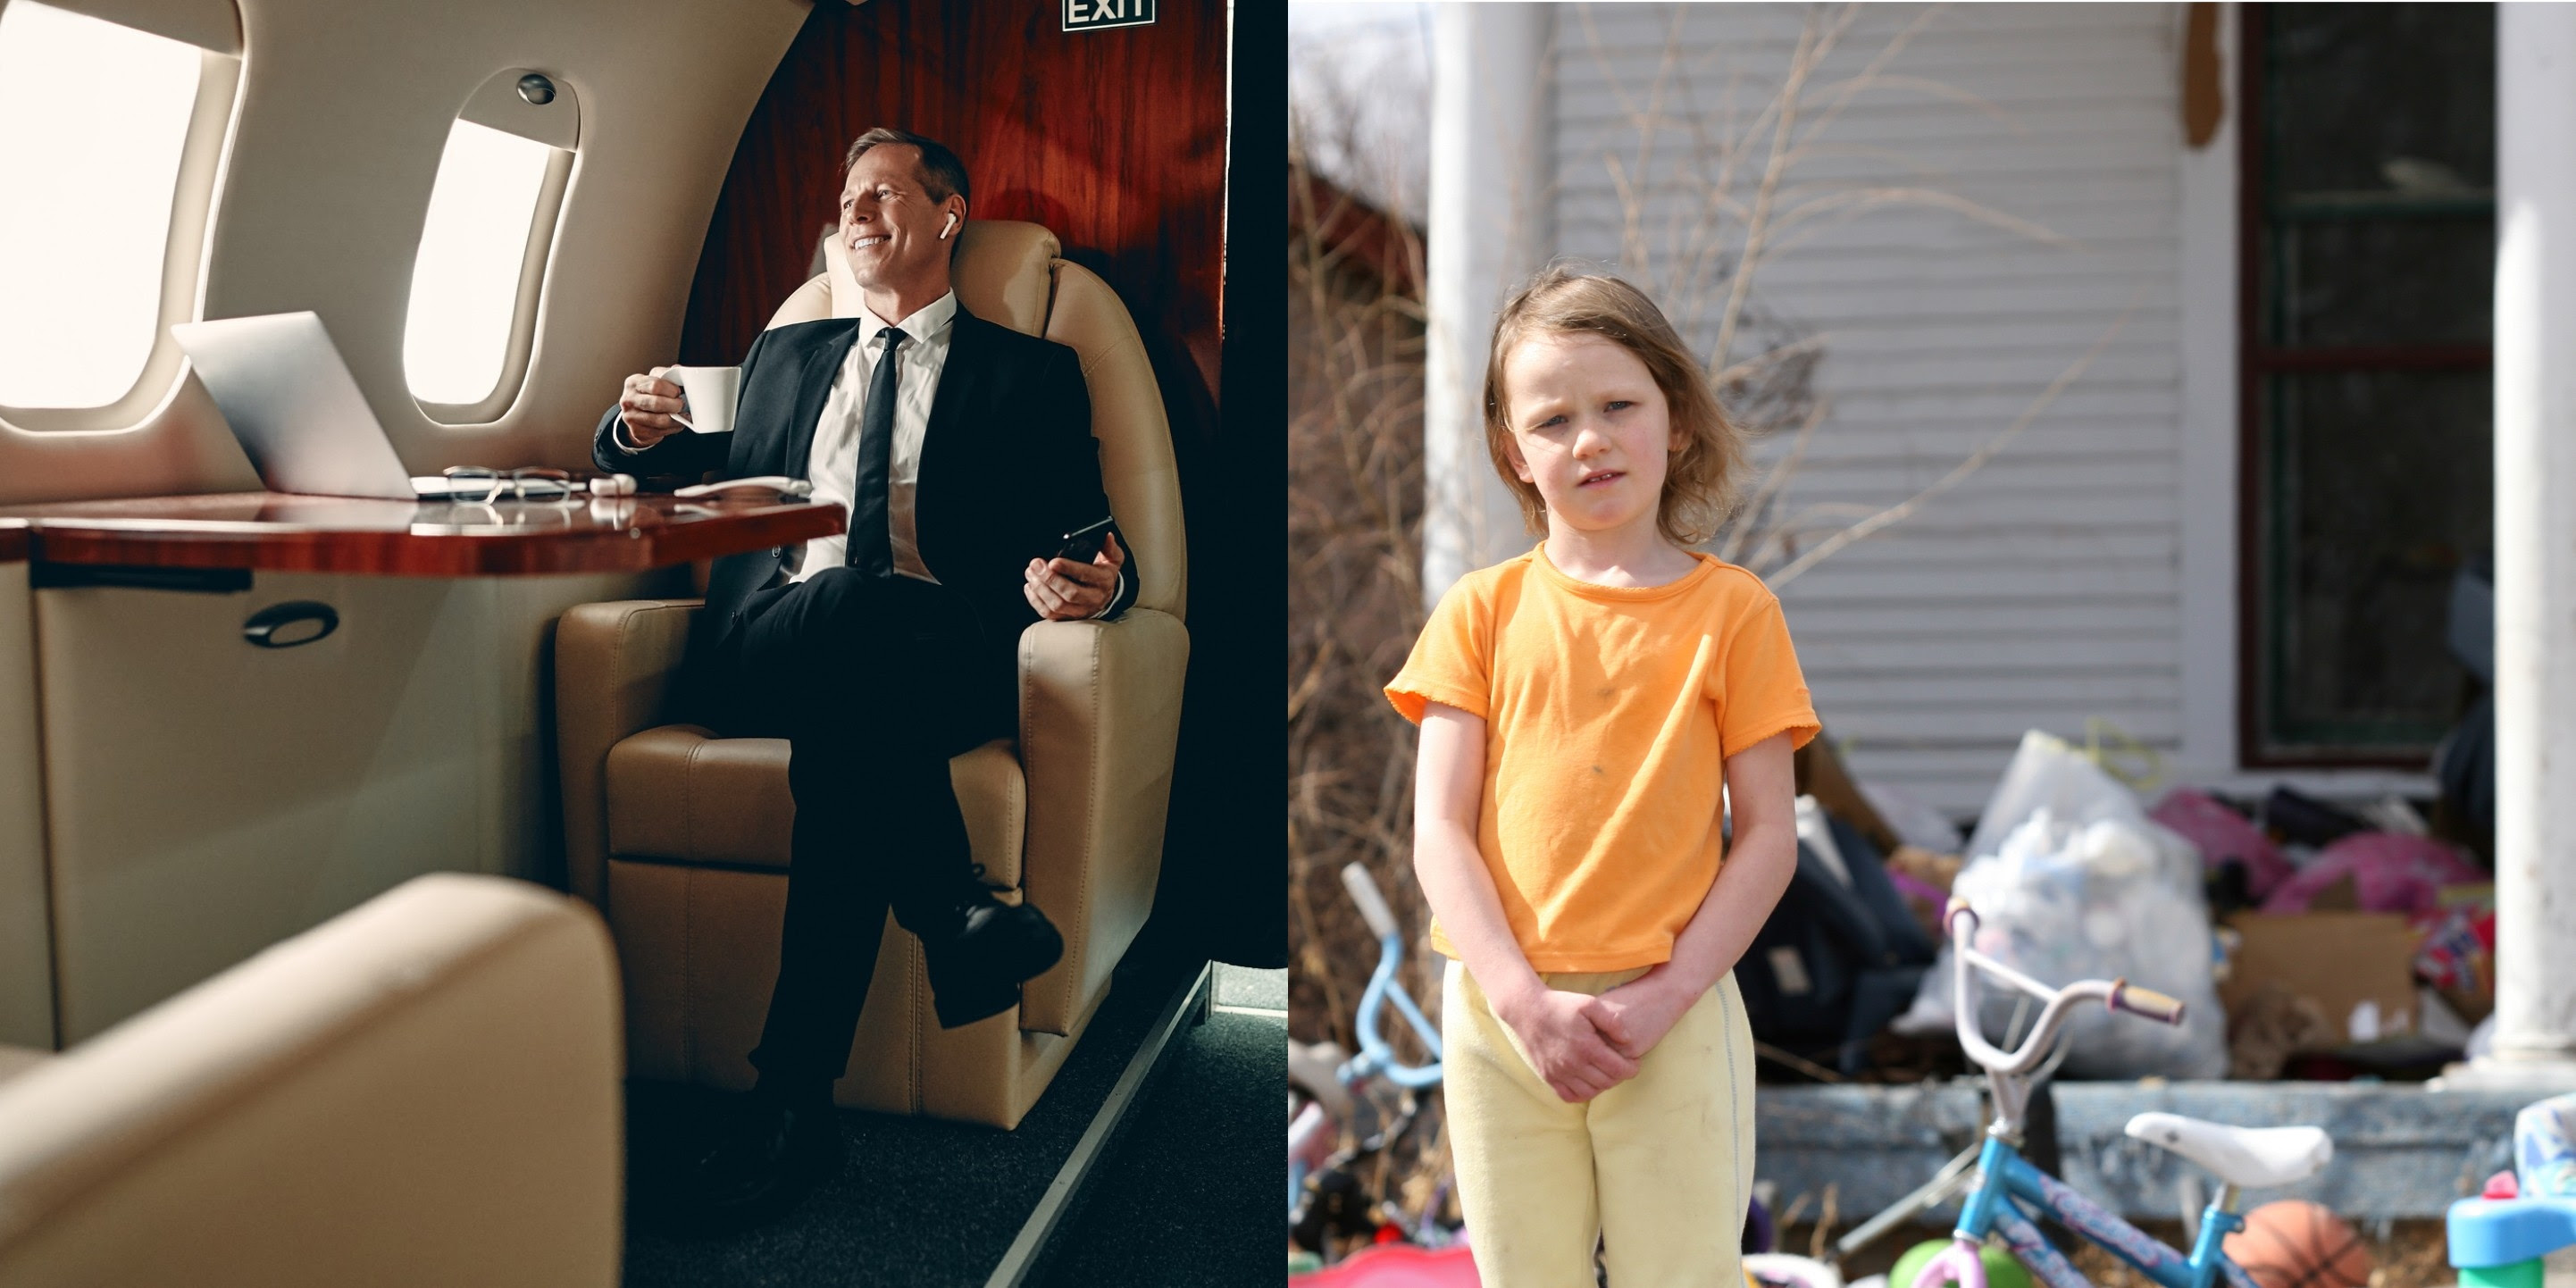 A photo of a rich man on a plane next to a photo of a little girl in dirty clothes and a messy yard